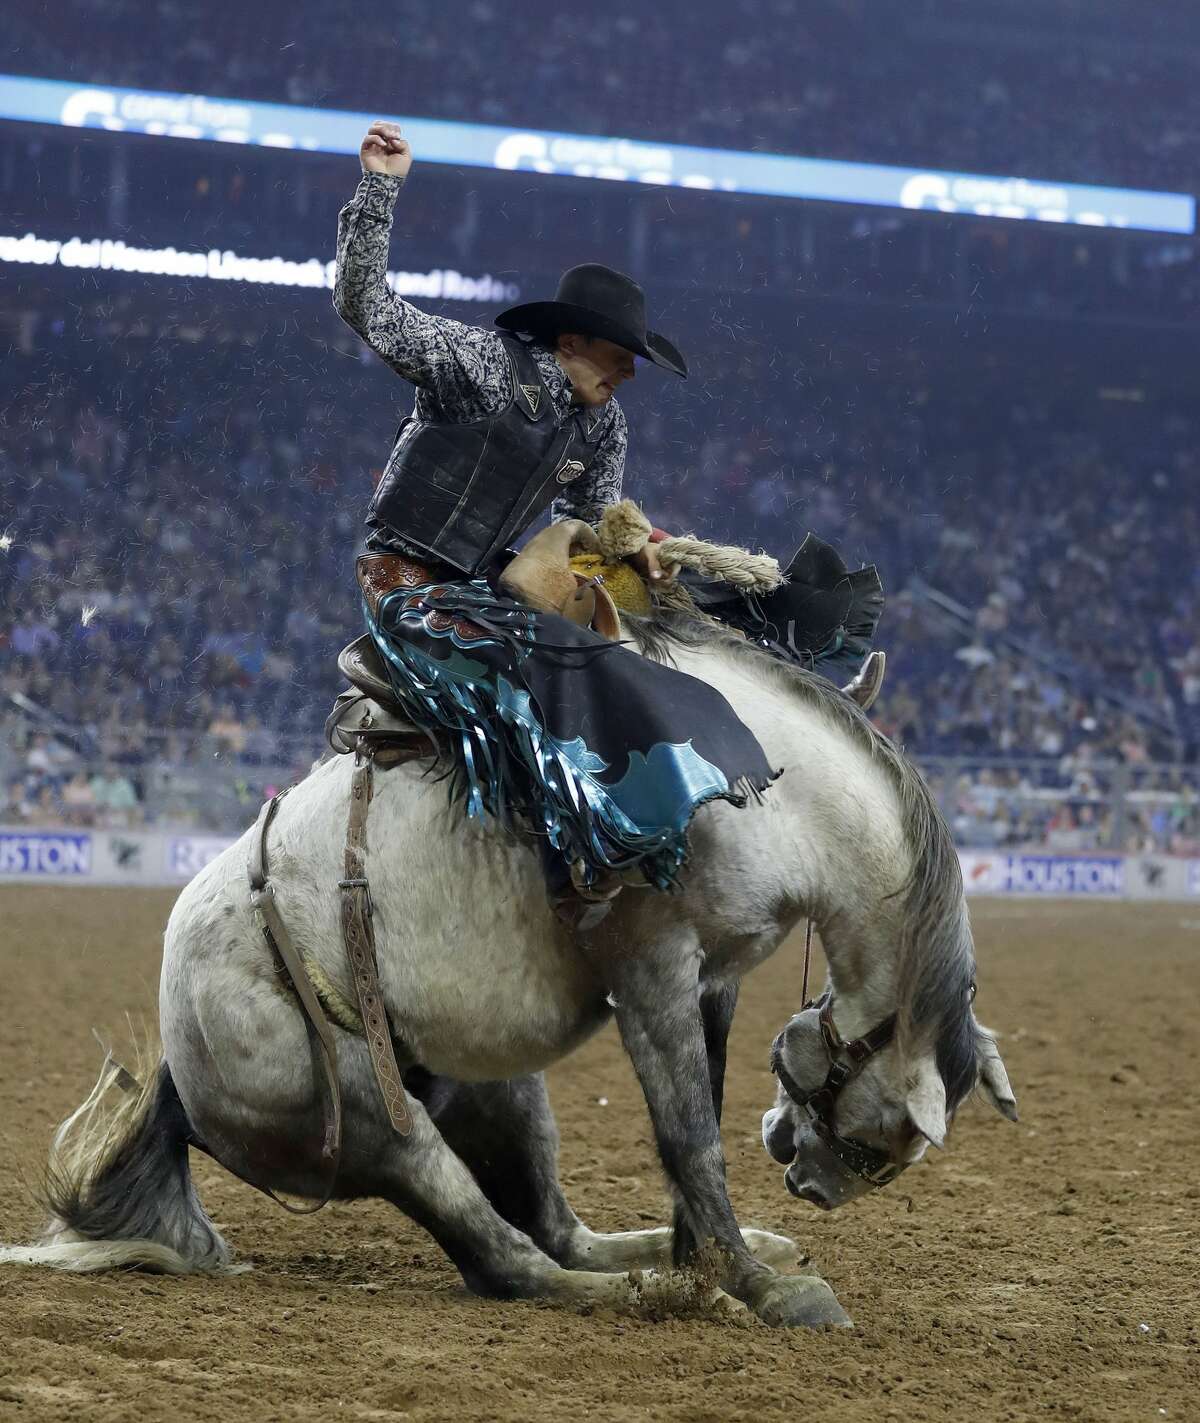 Cheat Burrito falls as Roper Kiesner tried to hang on, he ended up with a reride option later, during the saddle bronc competition semifinals at the Houston Livestock Show and Rodeo at NRG Stadium, Wednesday, March 22, 2017, in Houston. ( Karen Warren / Houston Chronicle )